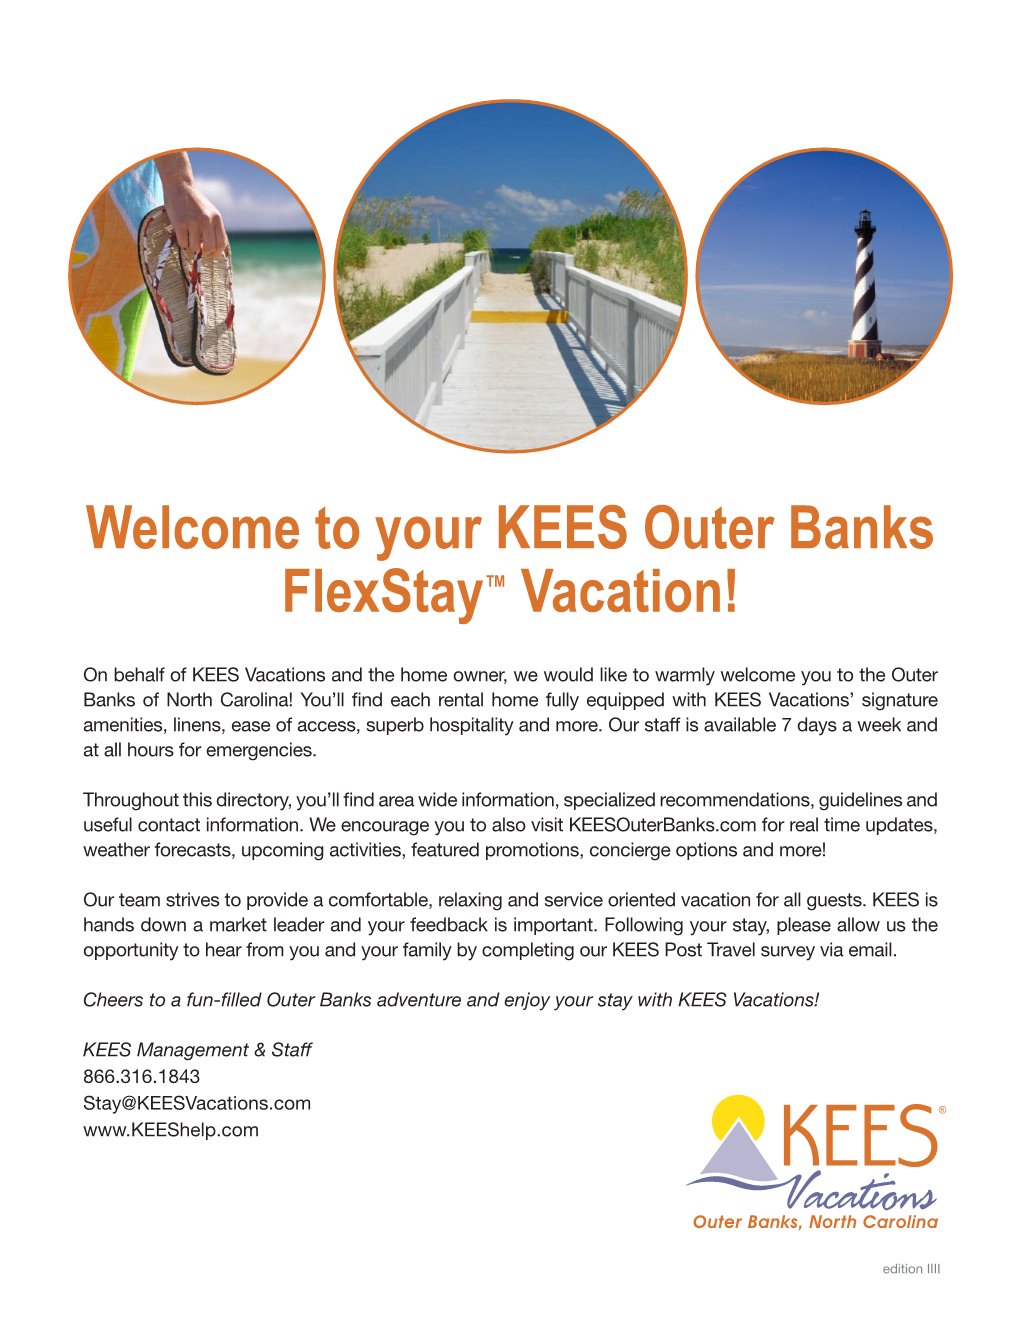 Welcome to Your KEES Outer Banks Flexstay™ Vacation!